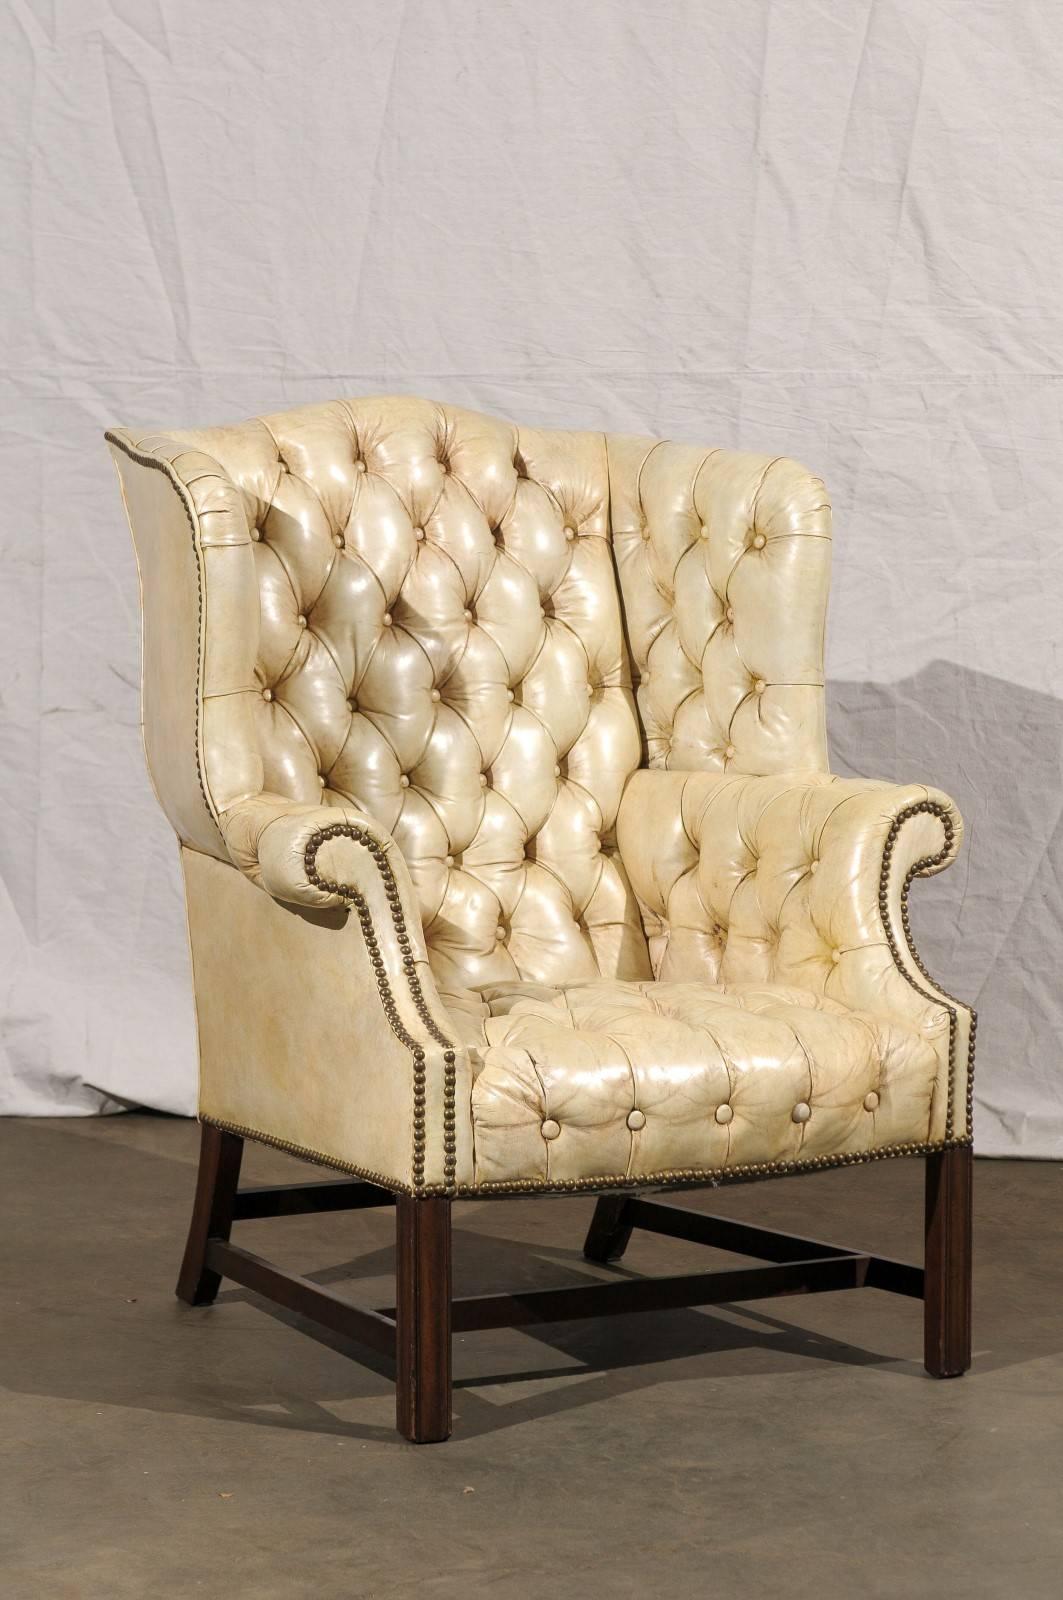 20th century Tufted Georgian style wing chair, white leather.